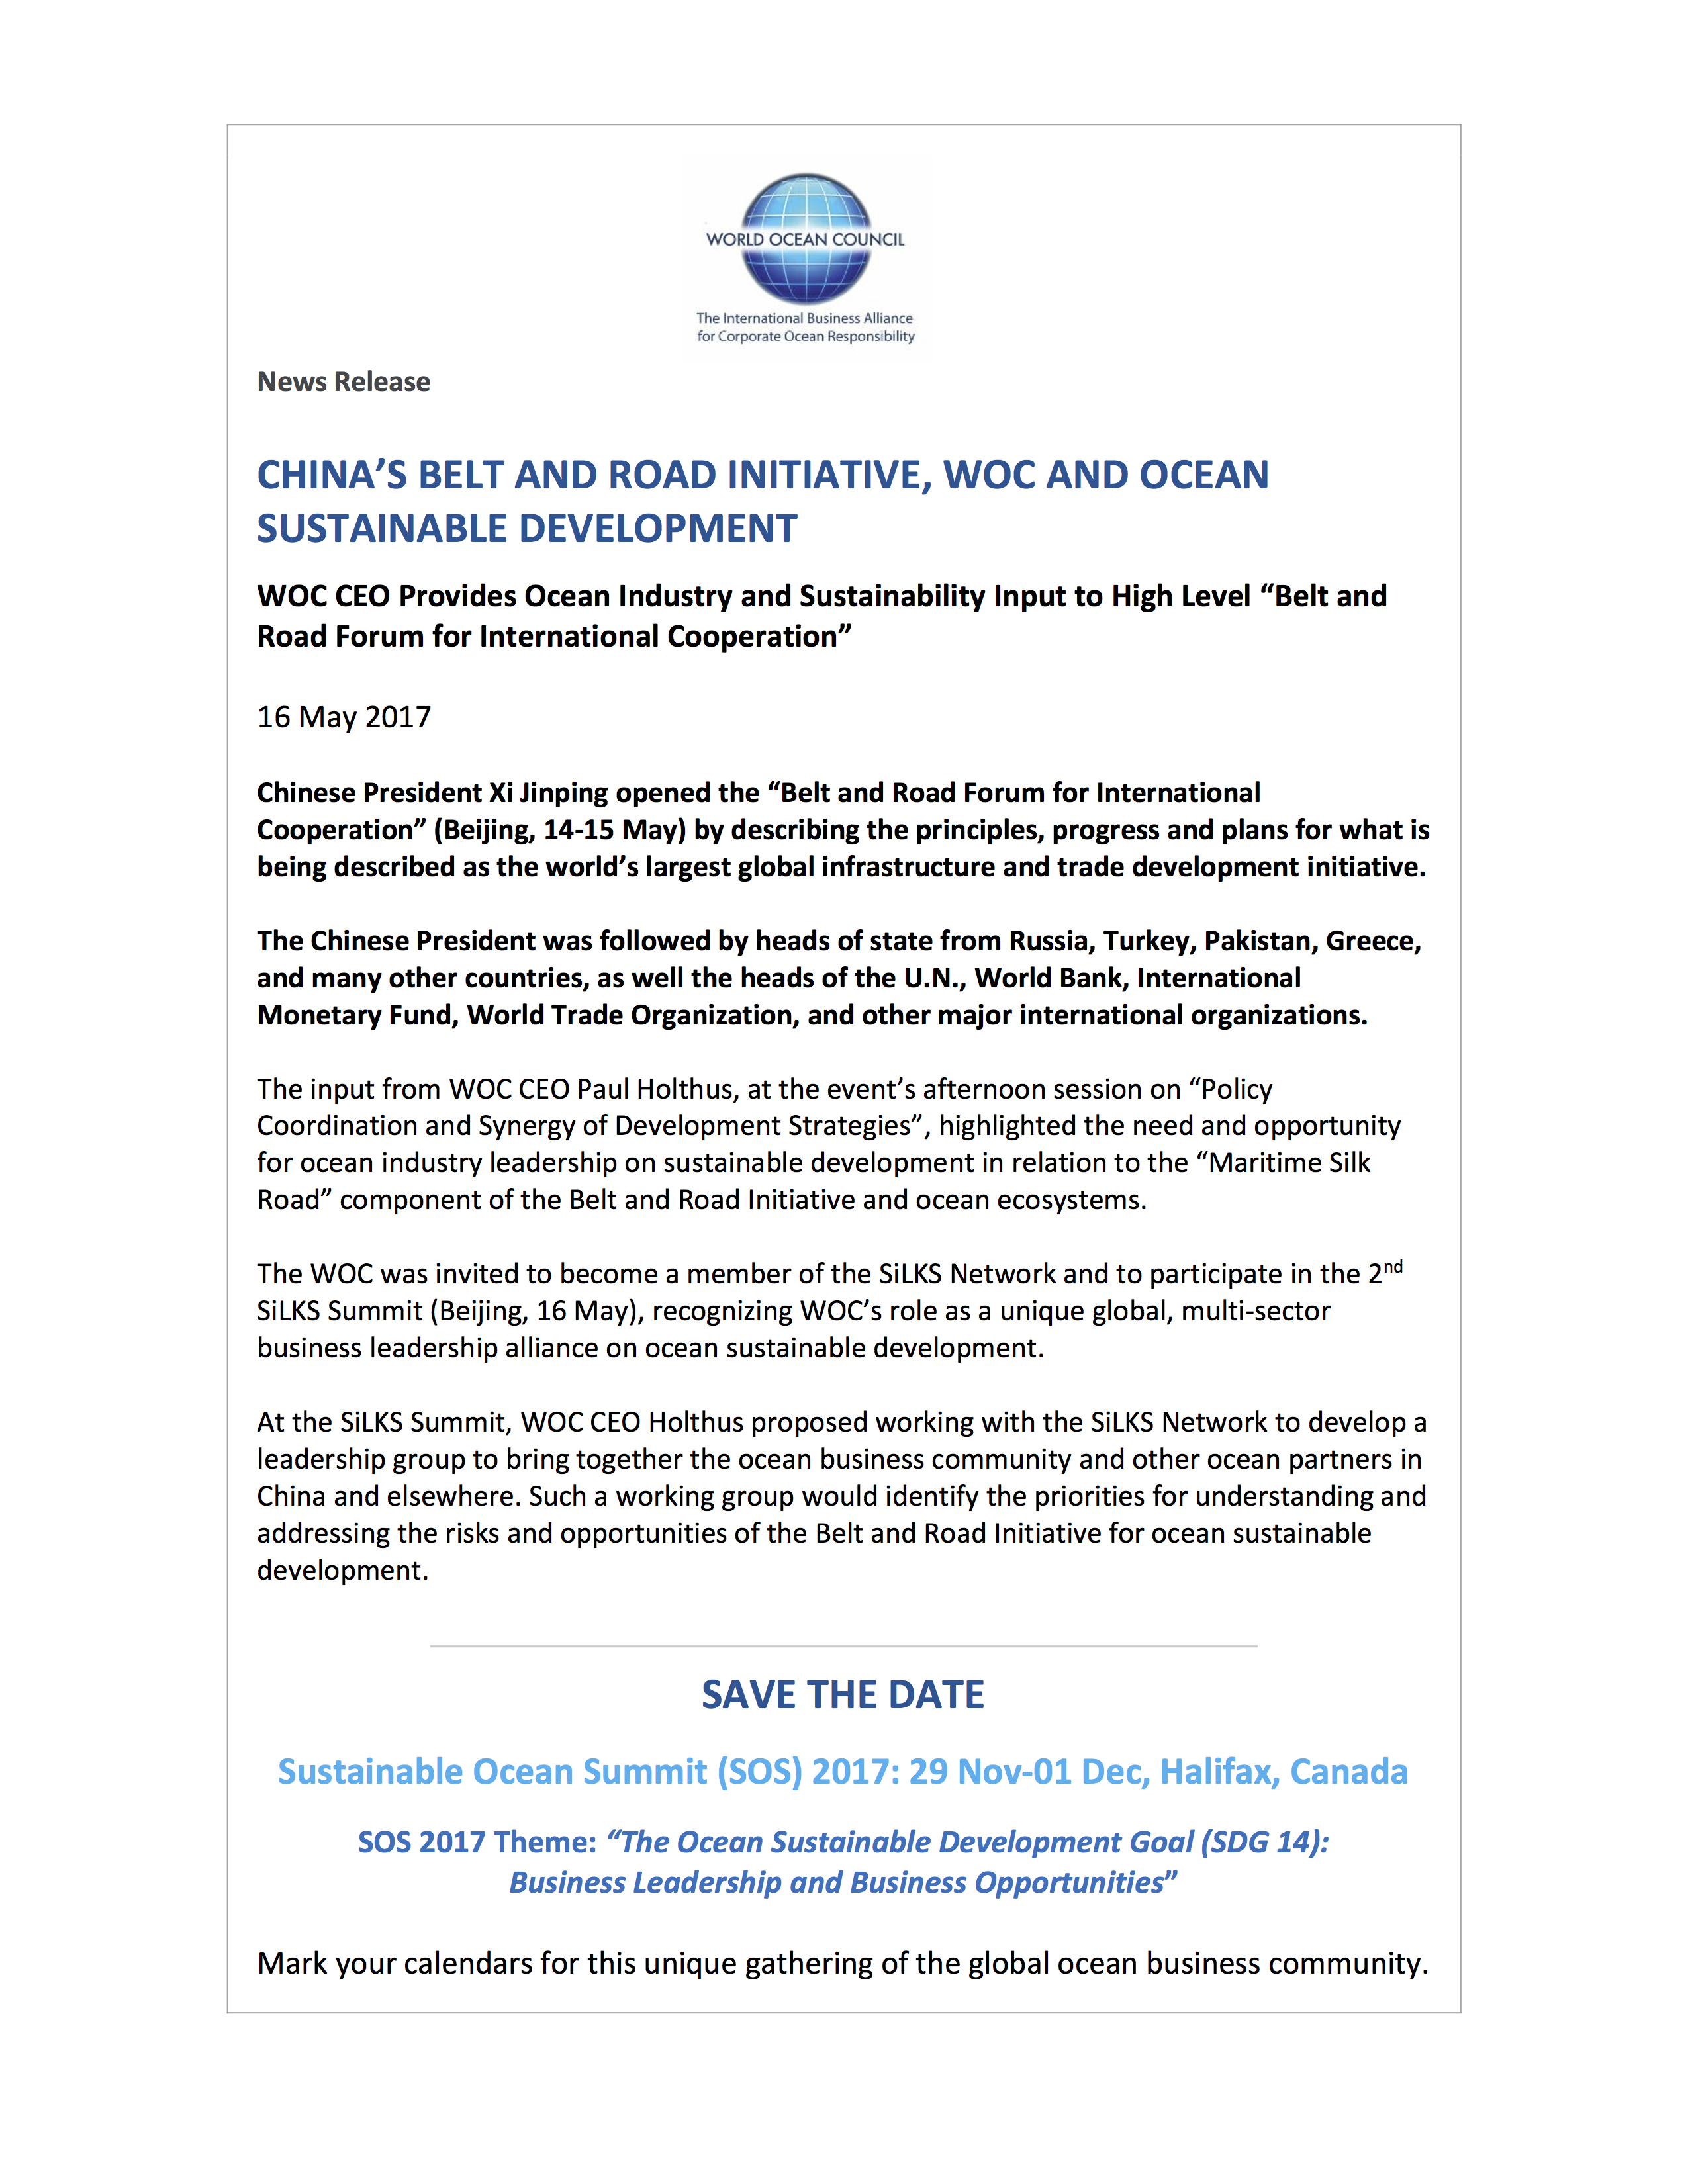 WOC News Release China Belt and Road Initiative, WOC and Sustainable Development